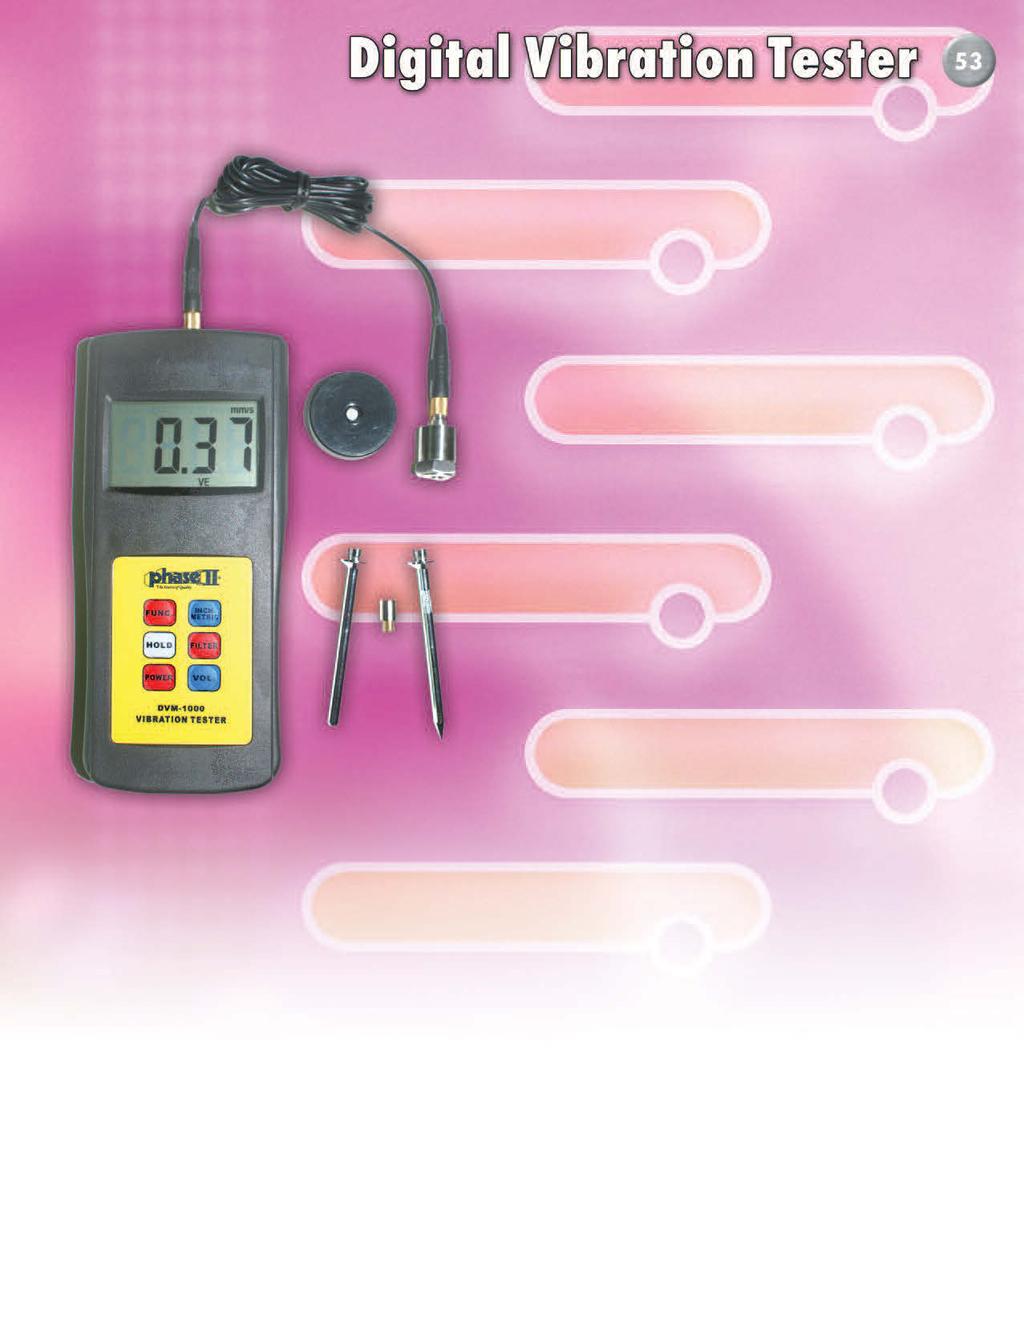 Multi-functional meter is capable of measuring Velocity, Acceleration, Displacement and RPM Frequency. Features: Quick accurate analysis for checking balance and alignment of a rotating object.